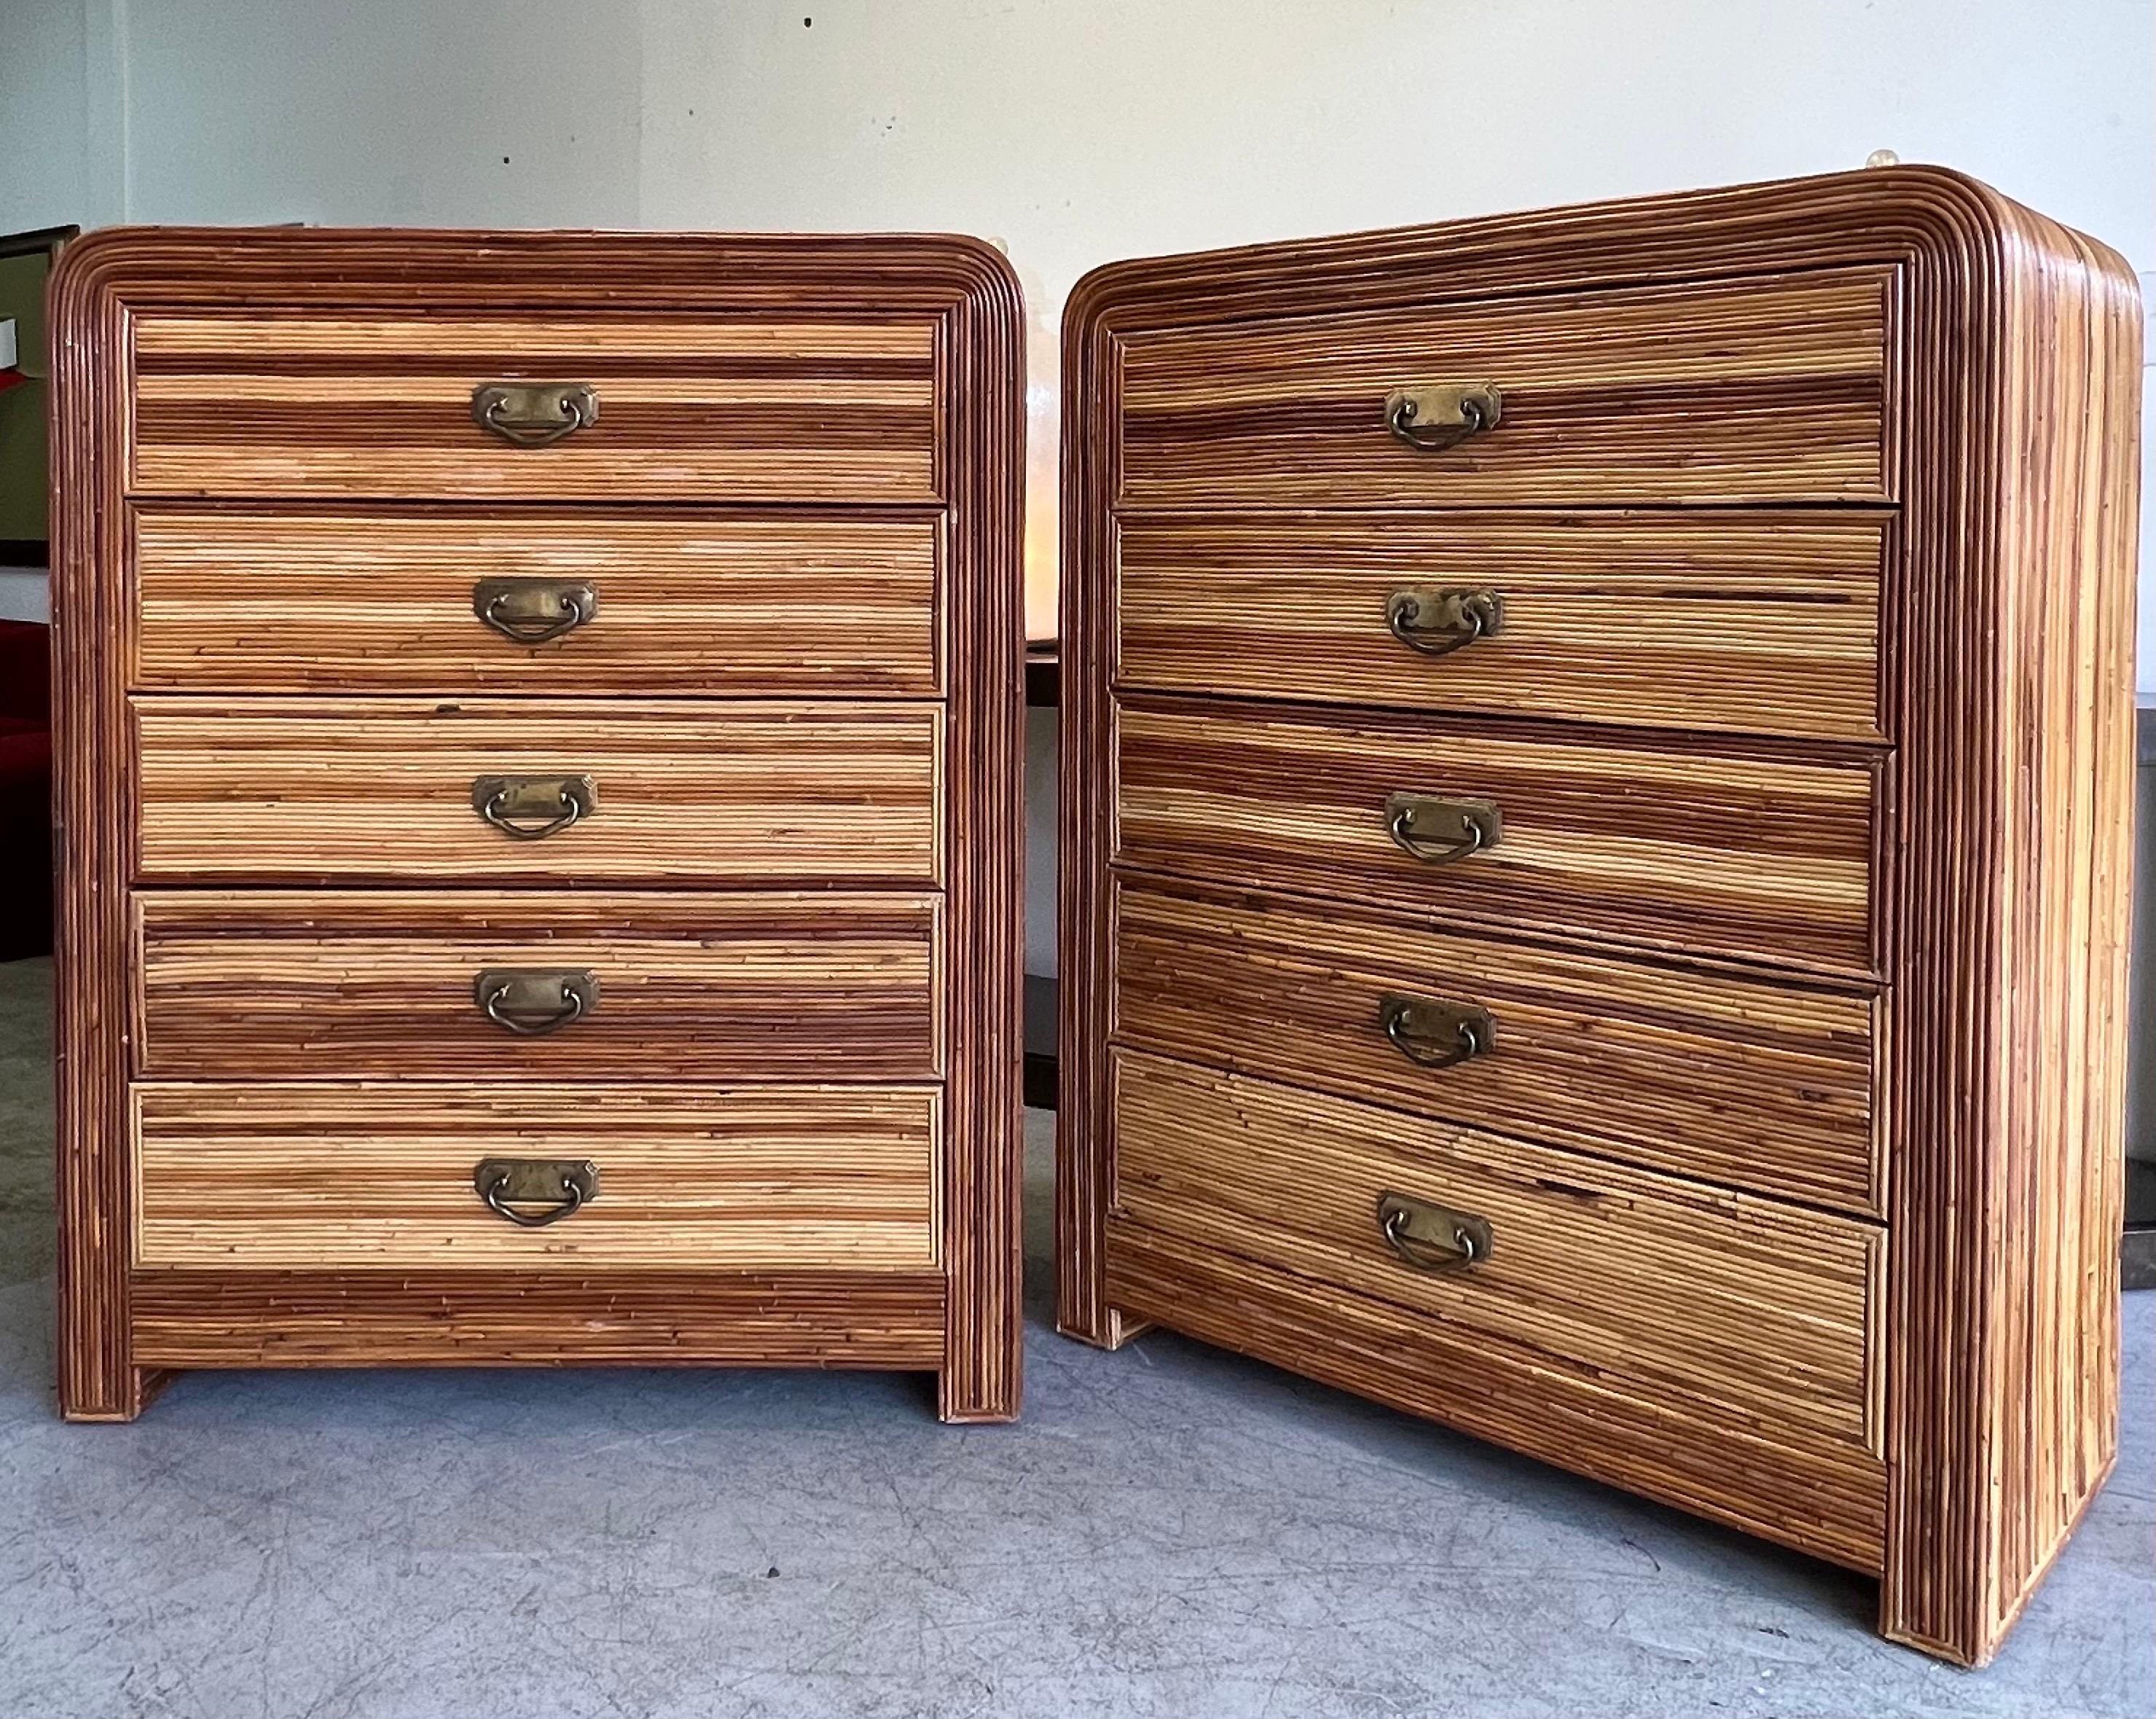 A pair of dressers on pencil reed bamboo. Waterfall design with 5 drawers each. Patinated brass hardware. In very good condition. 